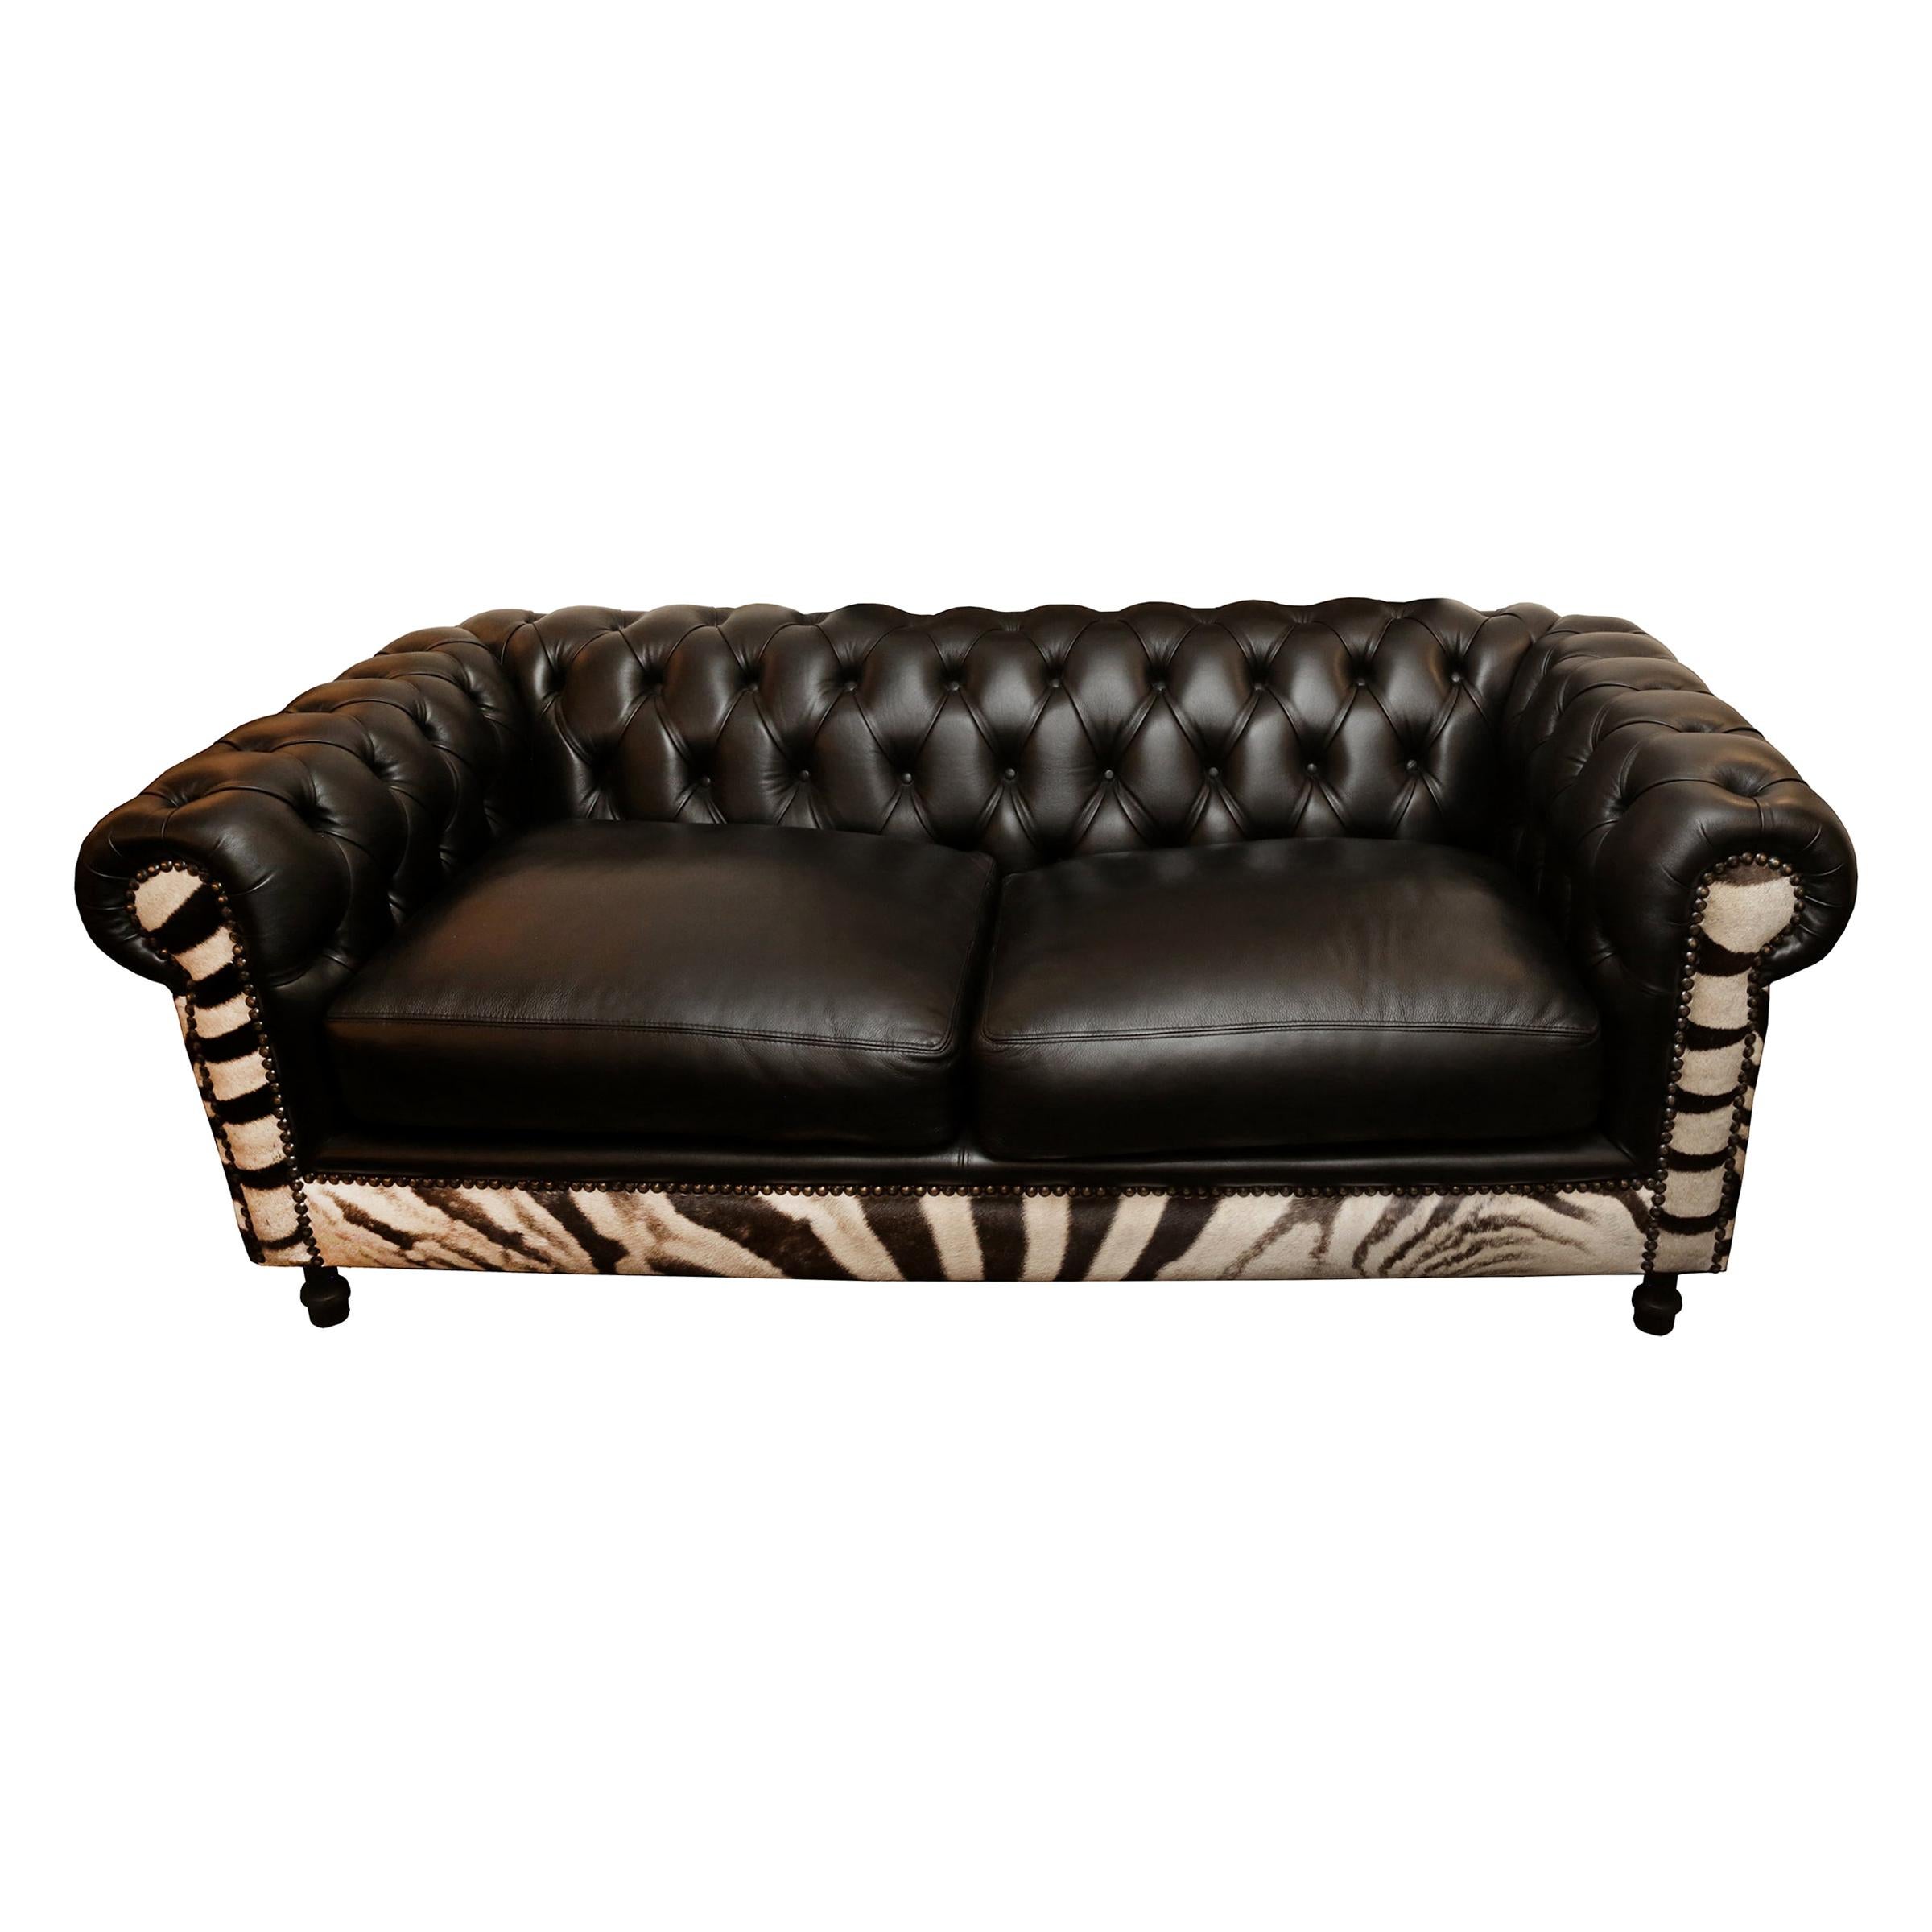 Real Zebra Skin And Black Leather, Real Leather Sofa Bed